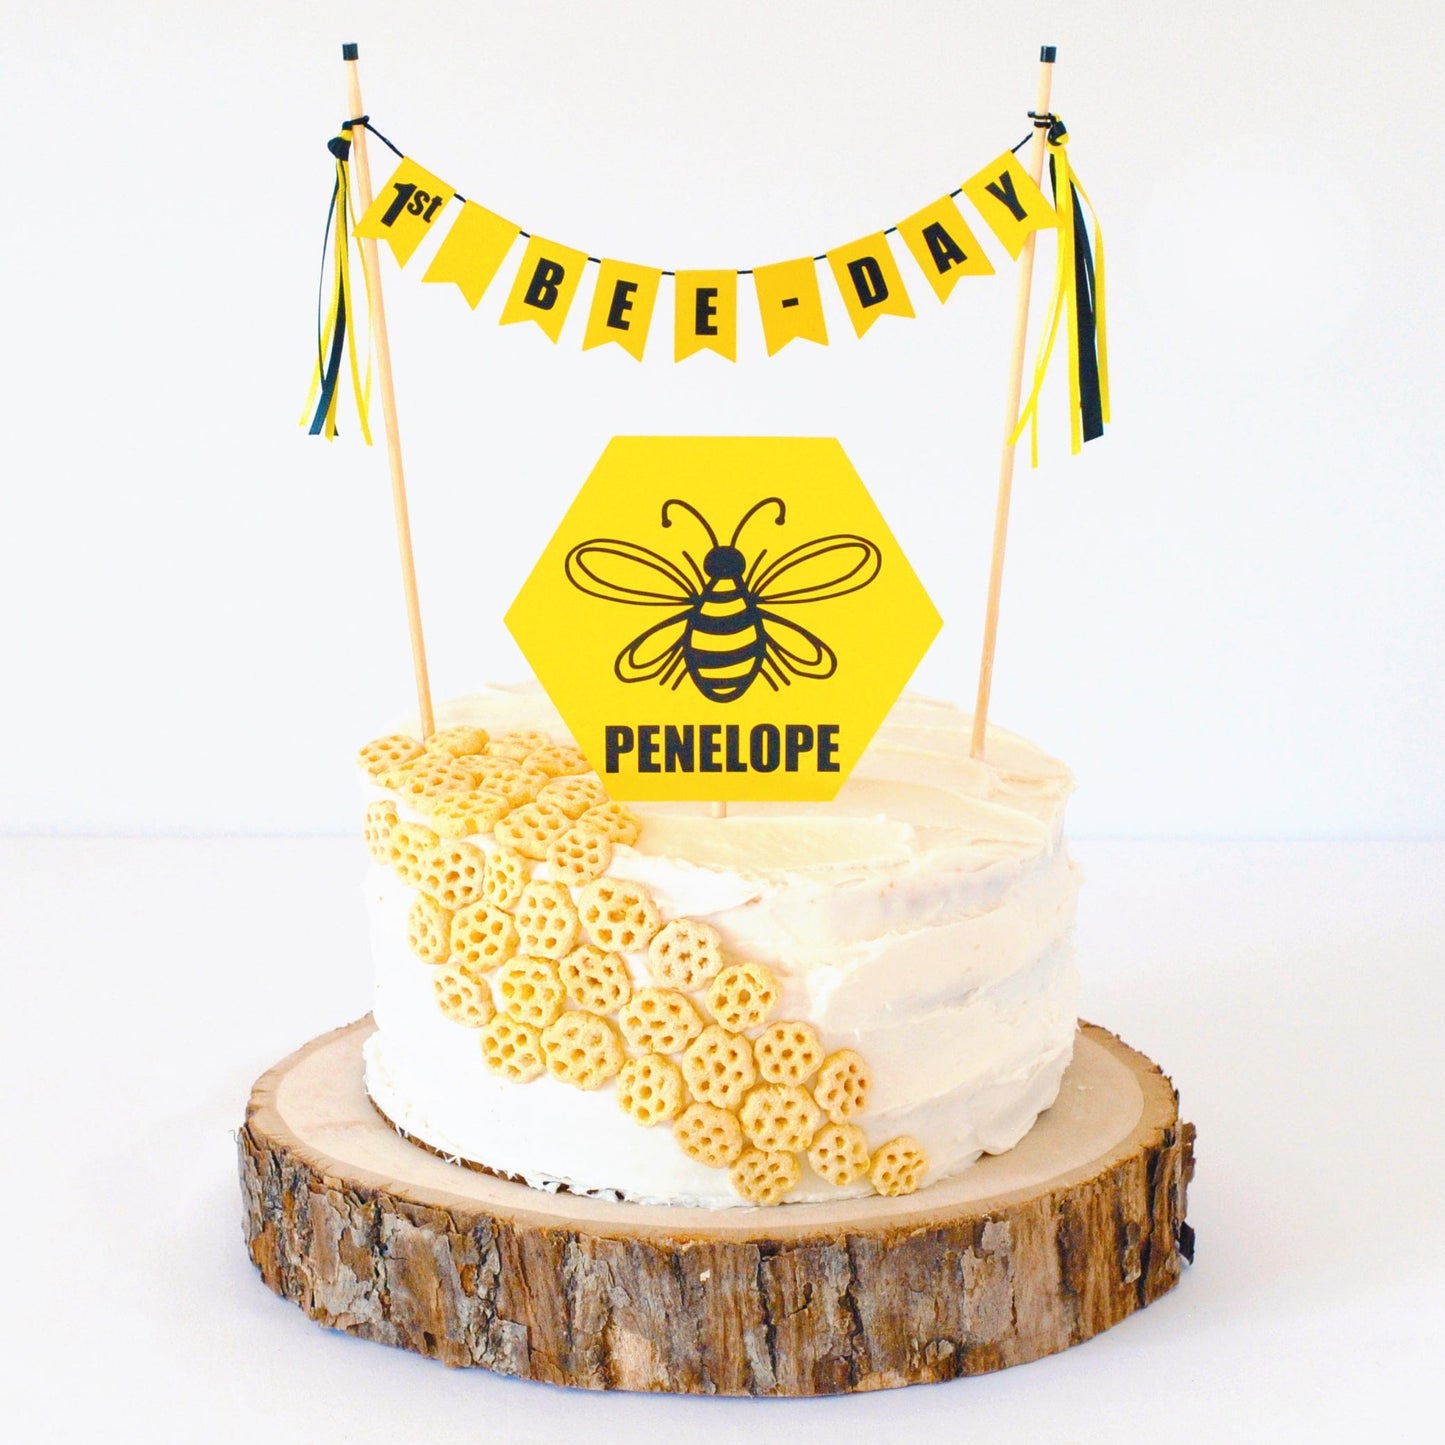 Honey Bee & Hive Theme Cake Delivery in Delhi NCR - ₹7,499.00 Cake Express